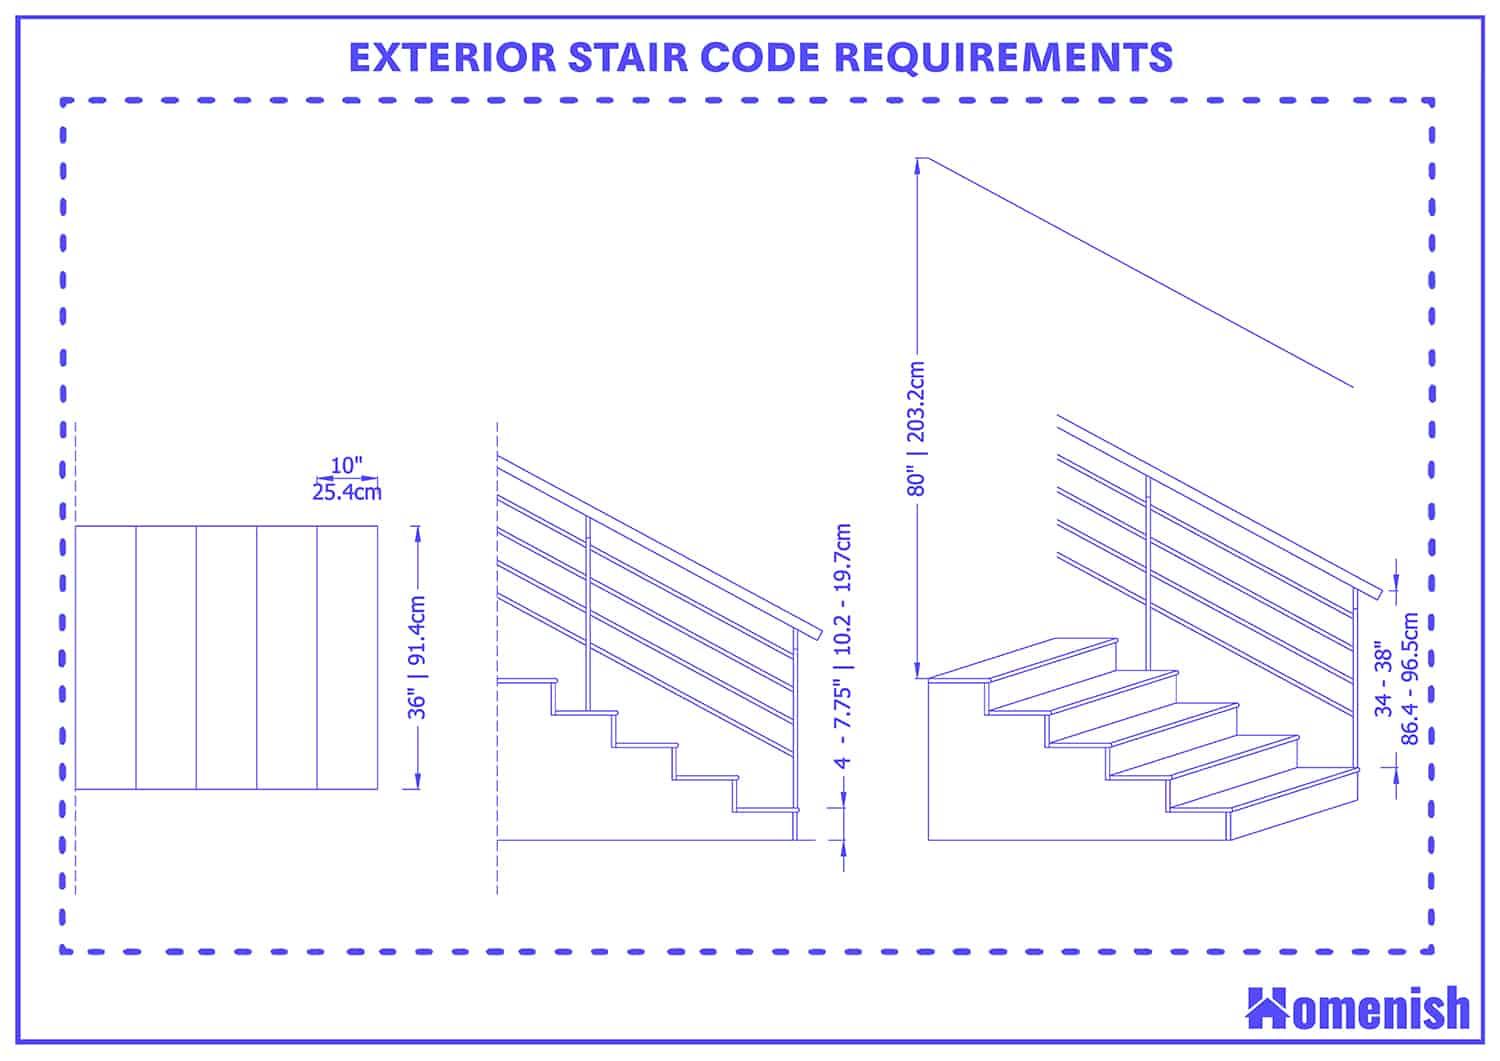 Exterior stair code requirements